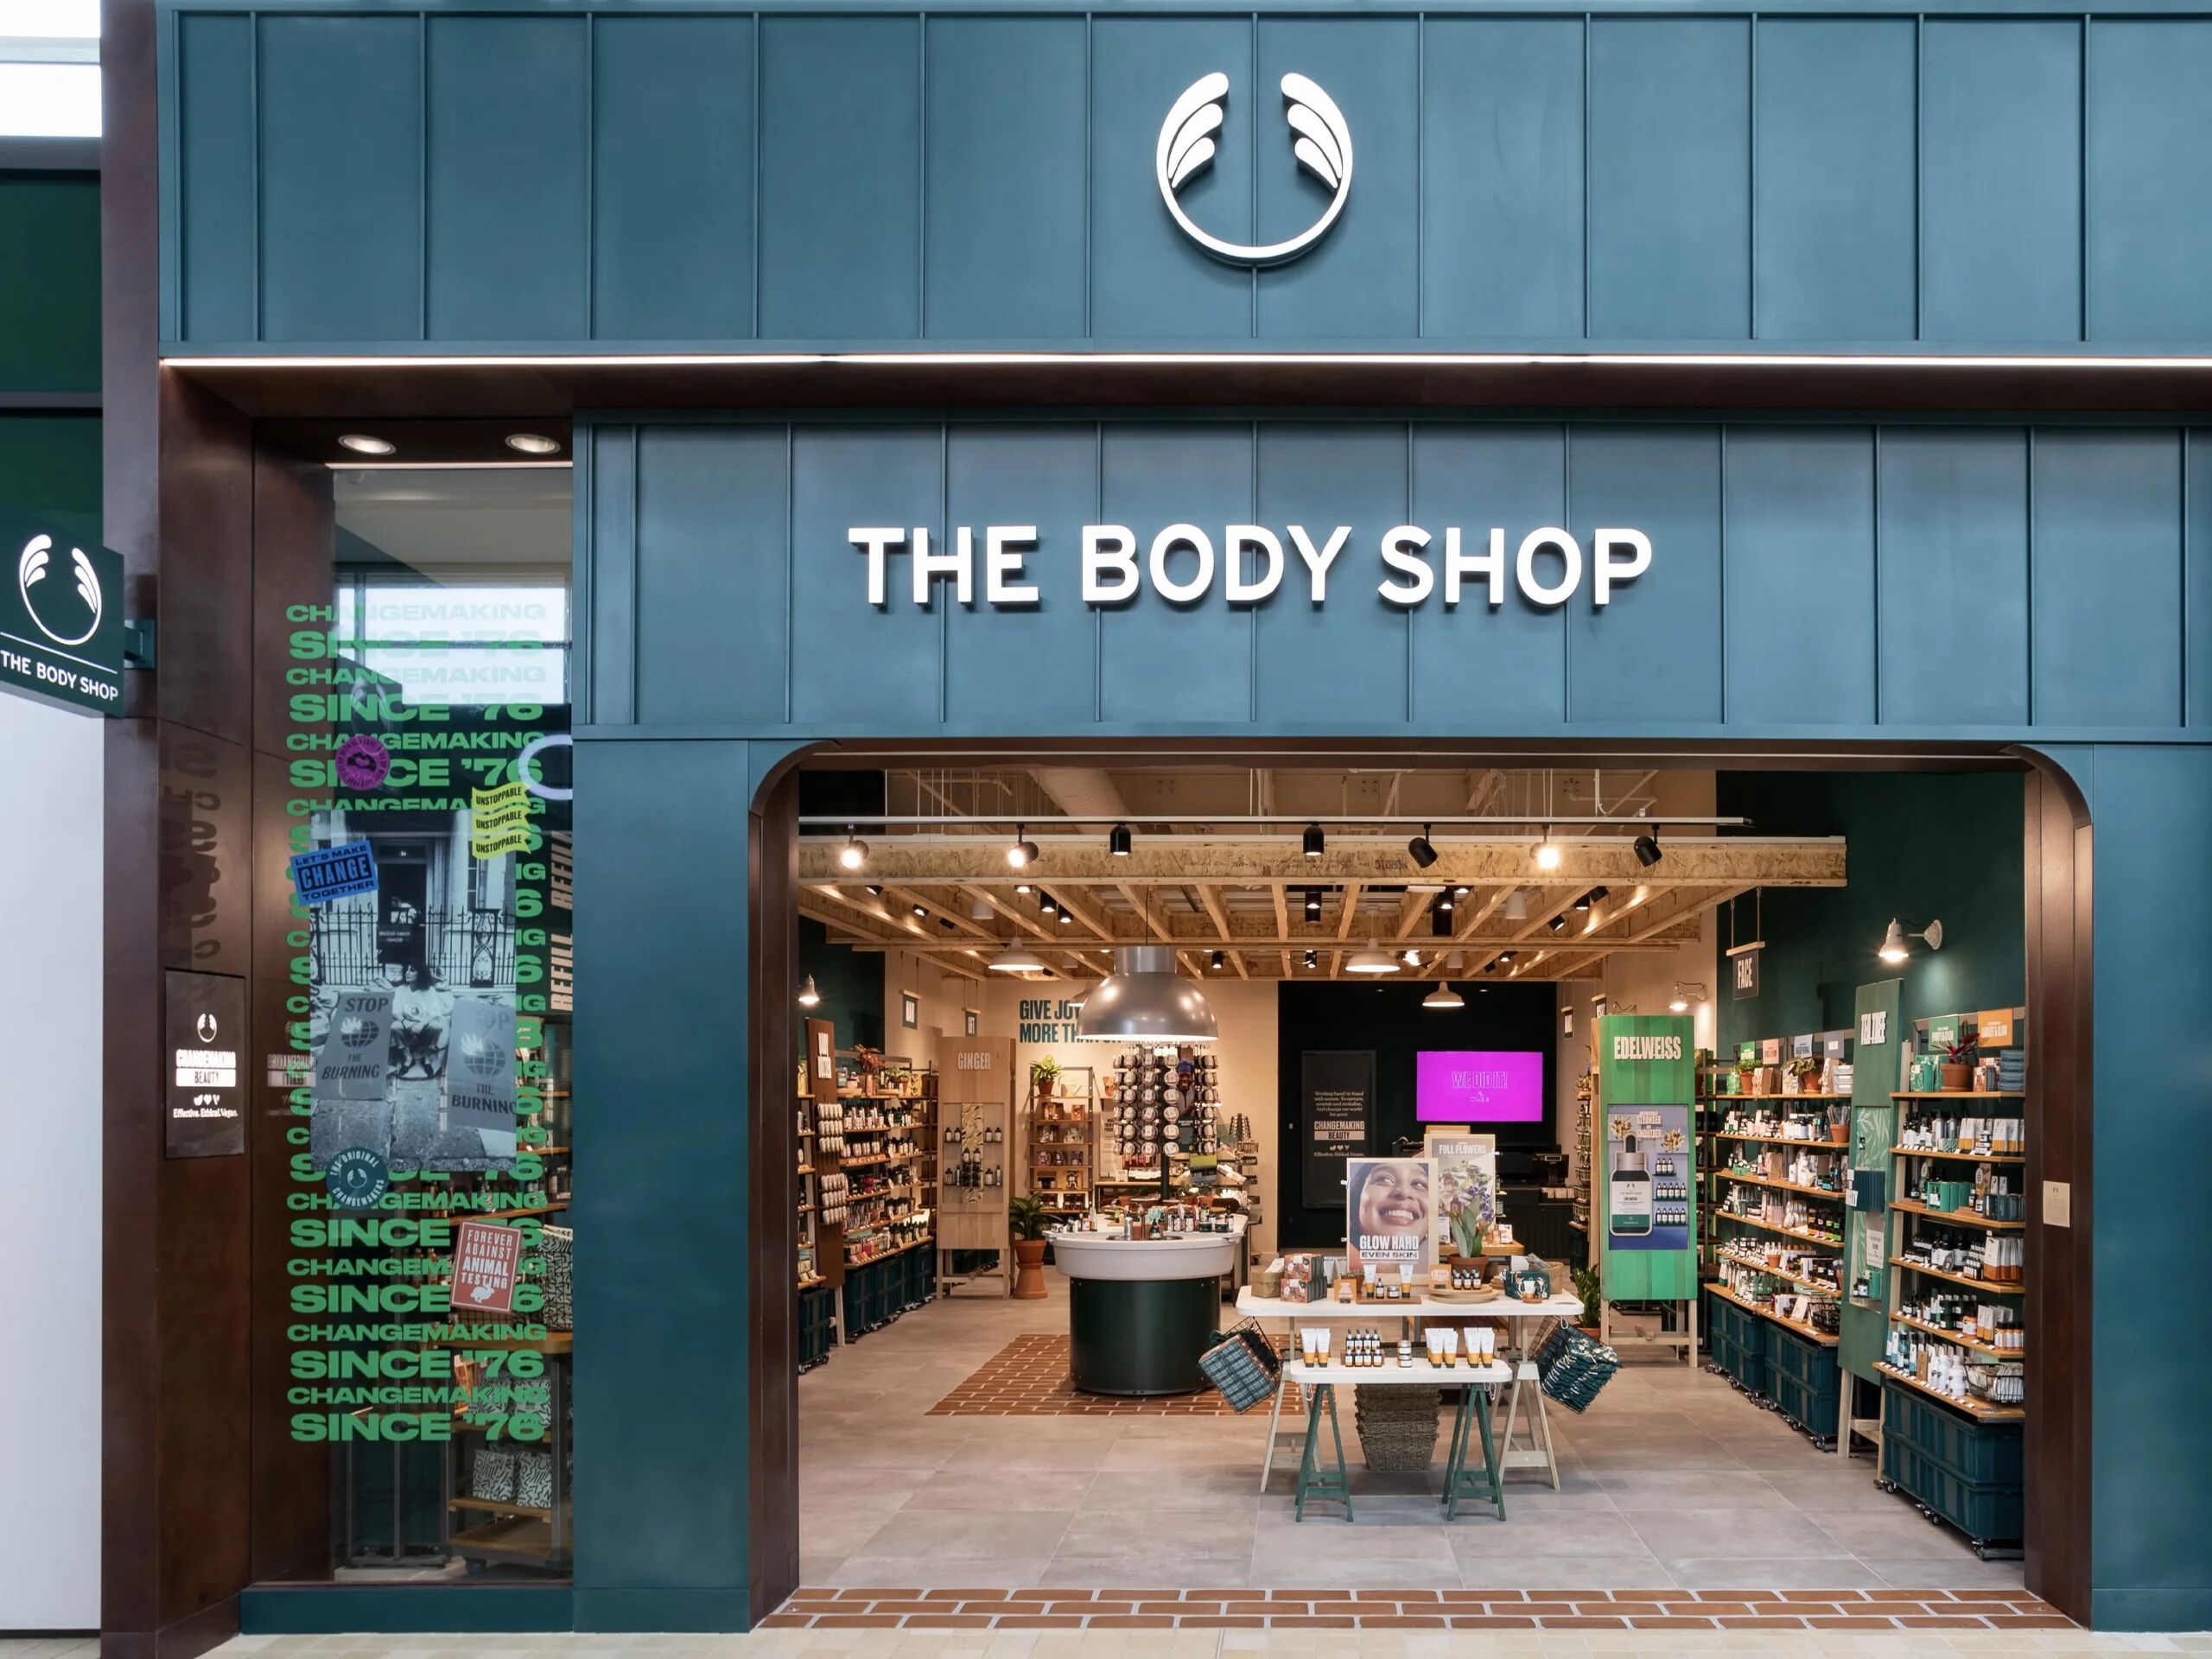 The Body Shop Calls for Bankruptcy, Will Shuts Down All Its Stores in the US